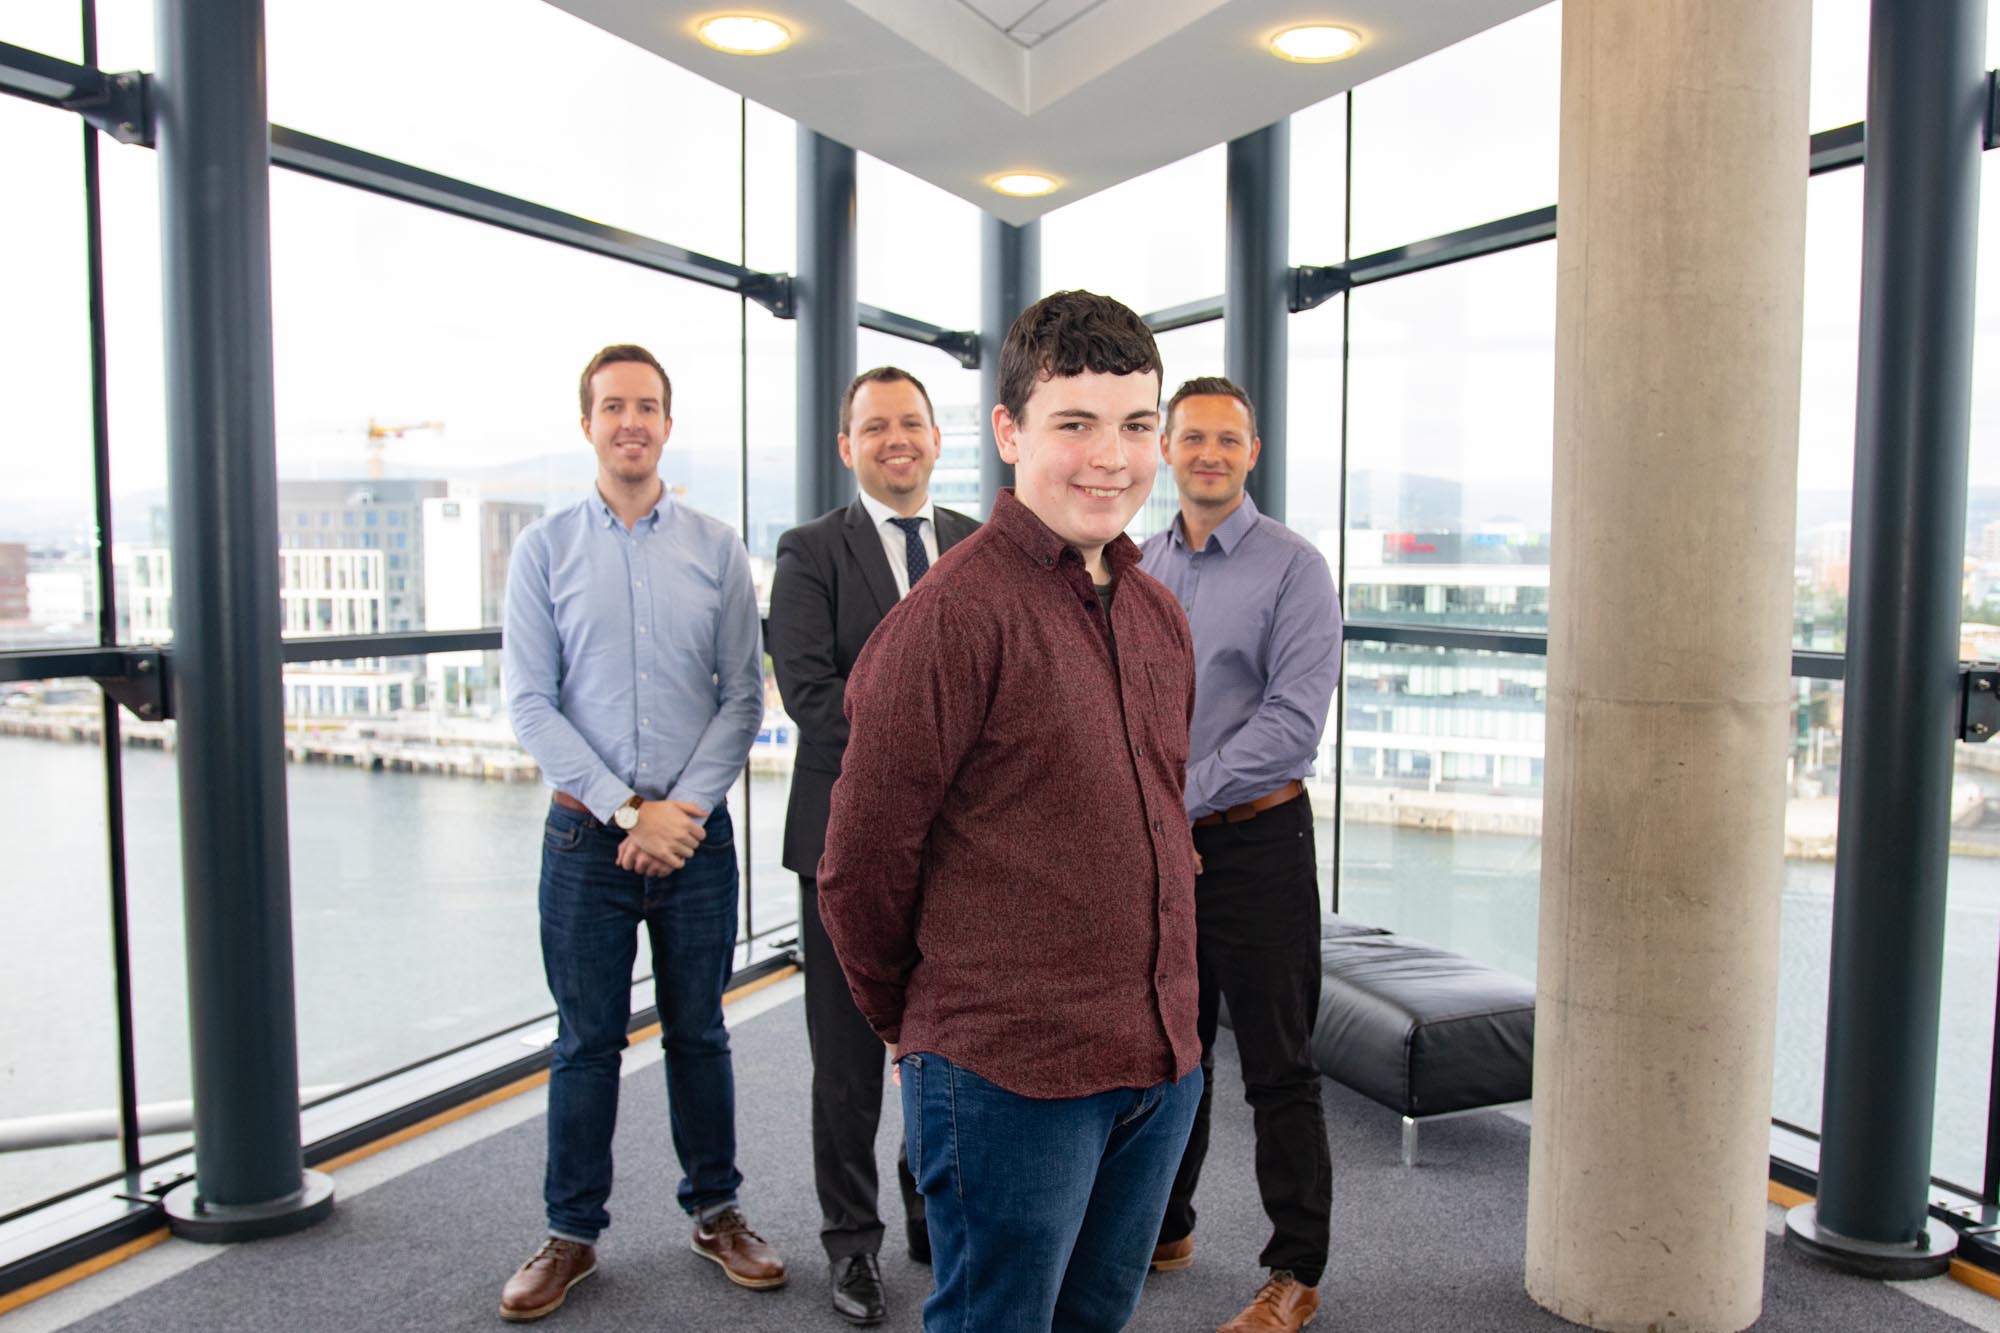 Caolan’s ‘Pick It Right’ App wins top prize at Kainos CodeCamp